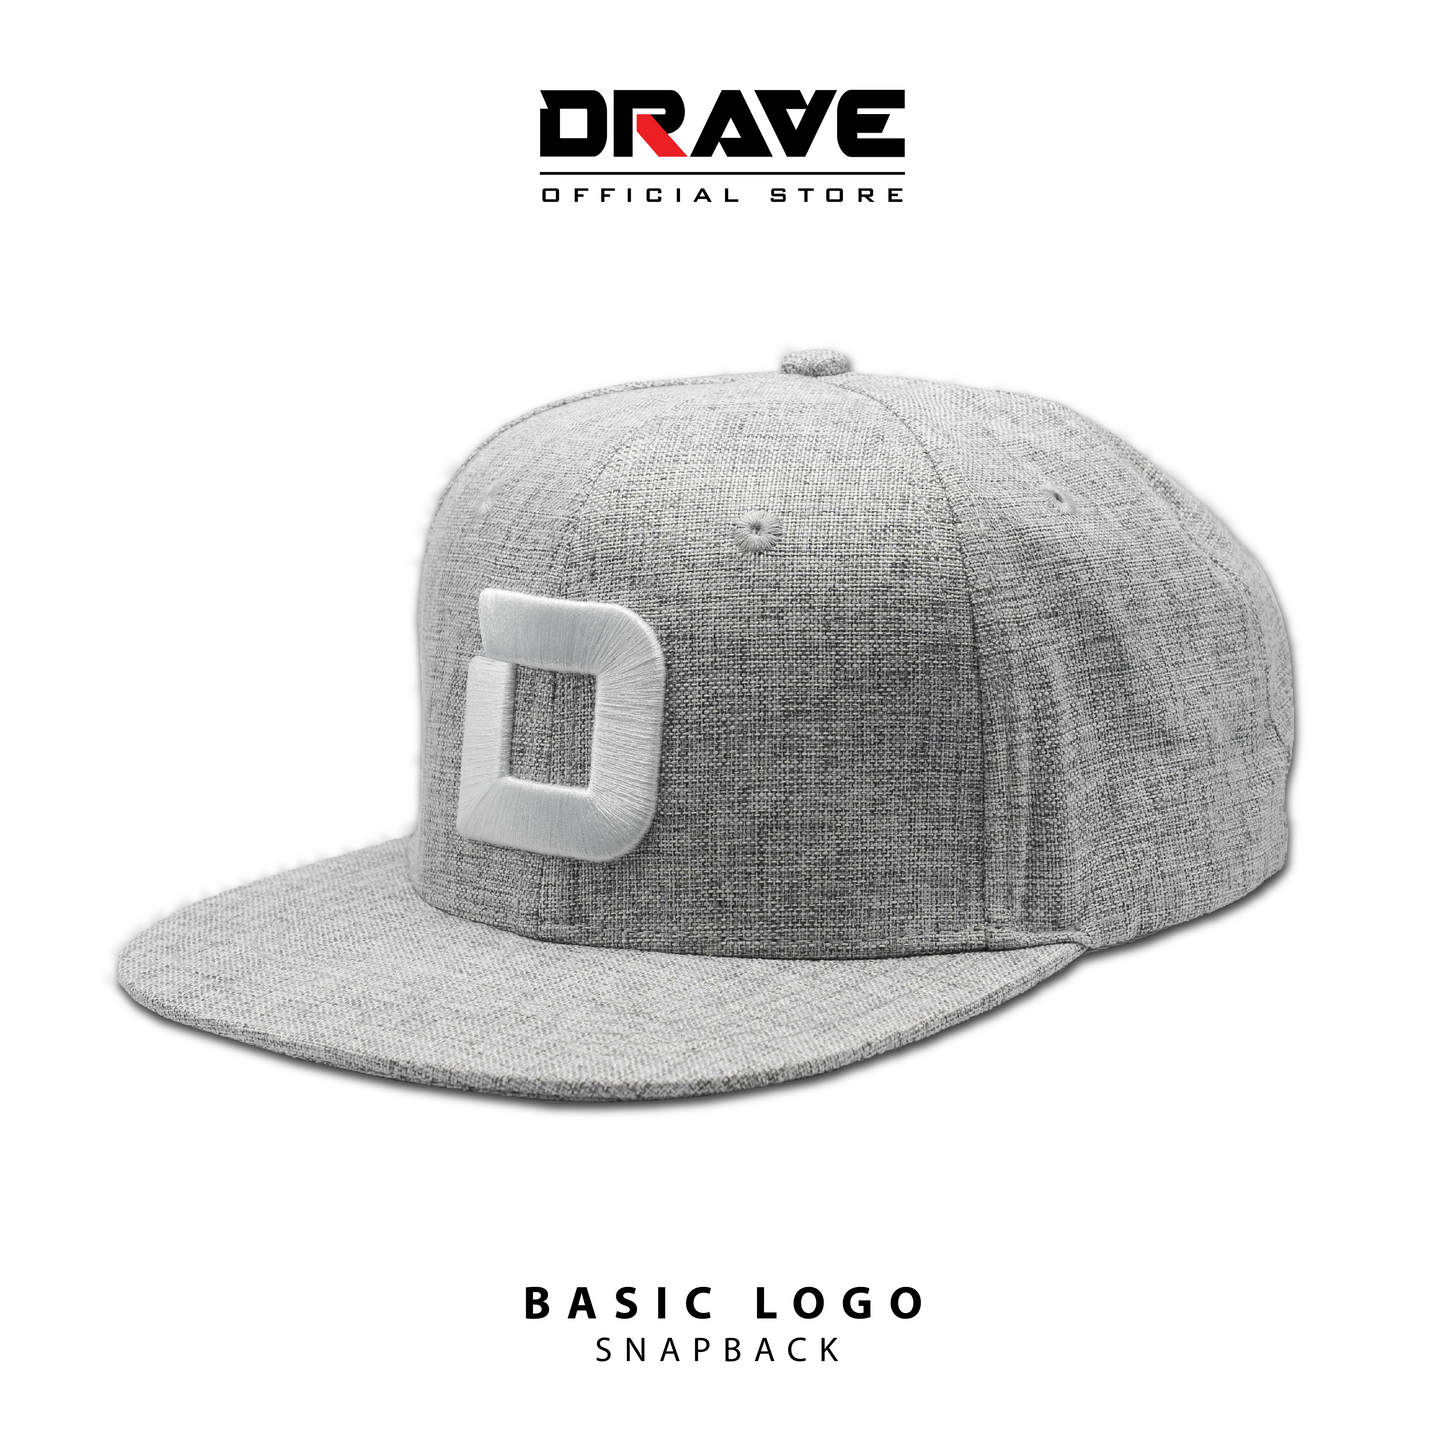 Drave Limited Edition Gray Snapback Hat